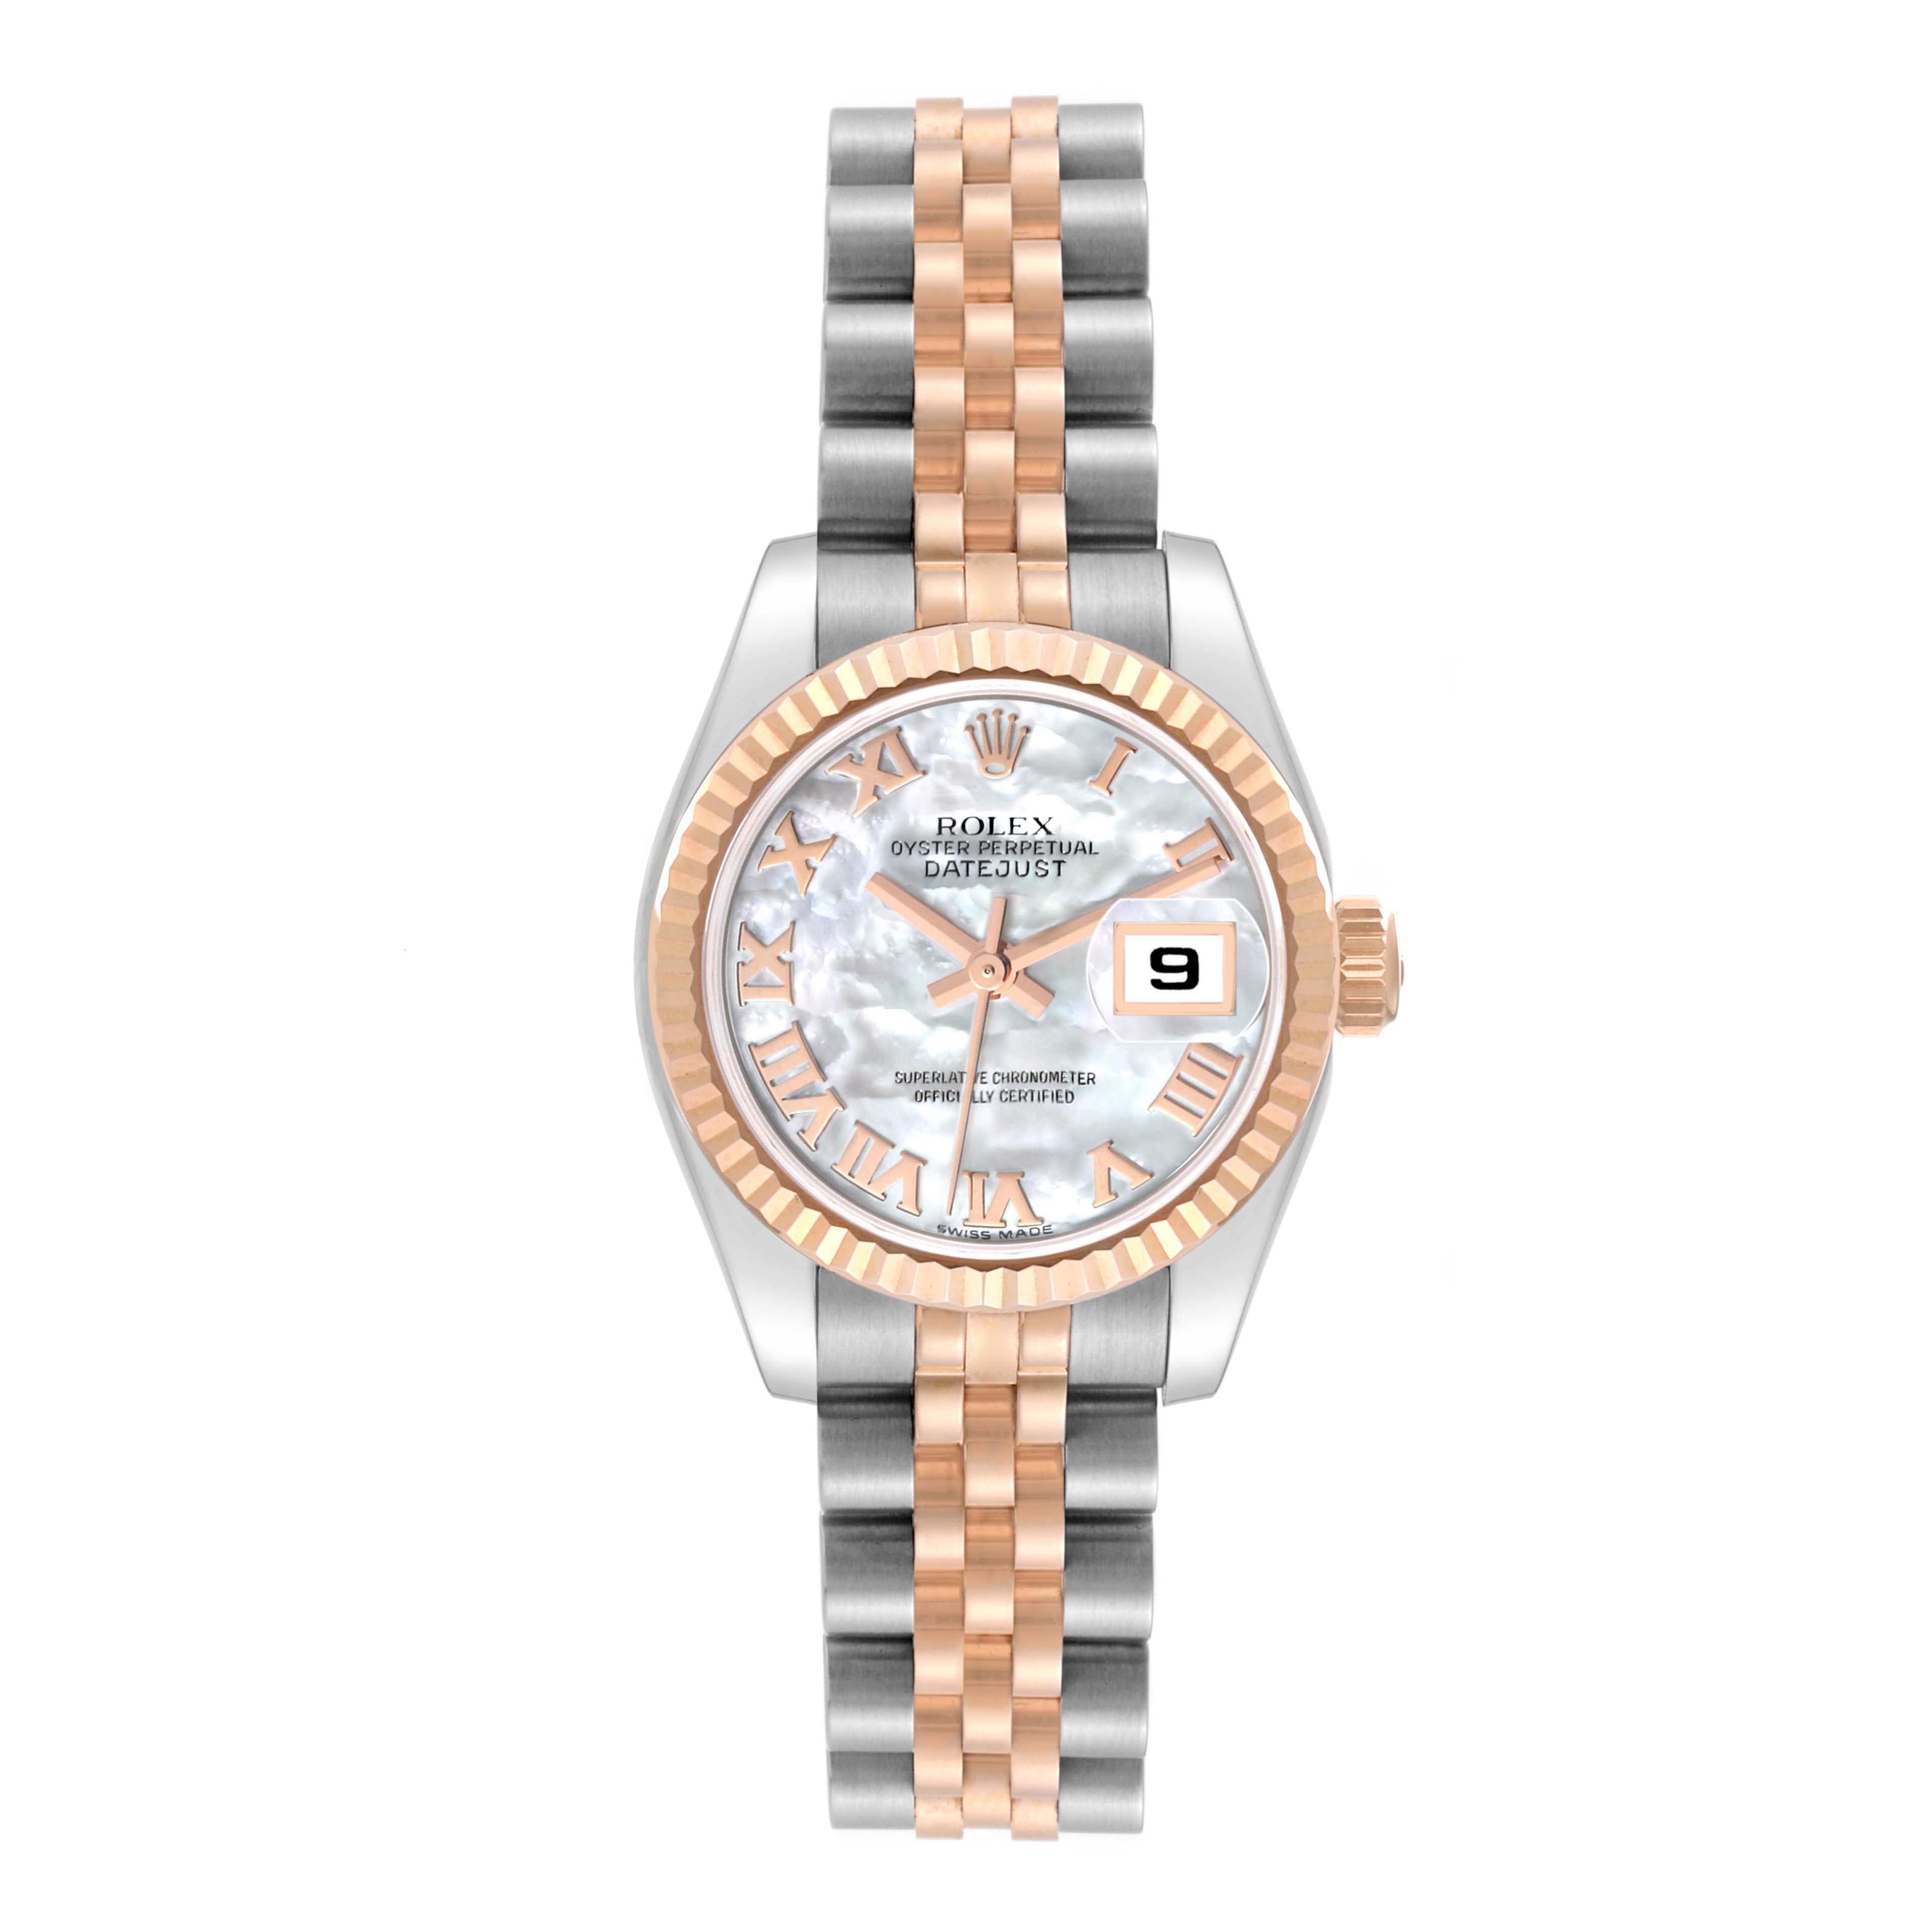 Rolex Datejust Steel Rose Gold Mother of Pearl Dial Ladies Watch 179171 In Excellent Condition For Sale In Atlanta, GA